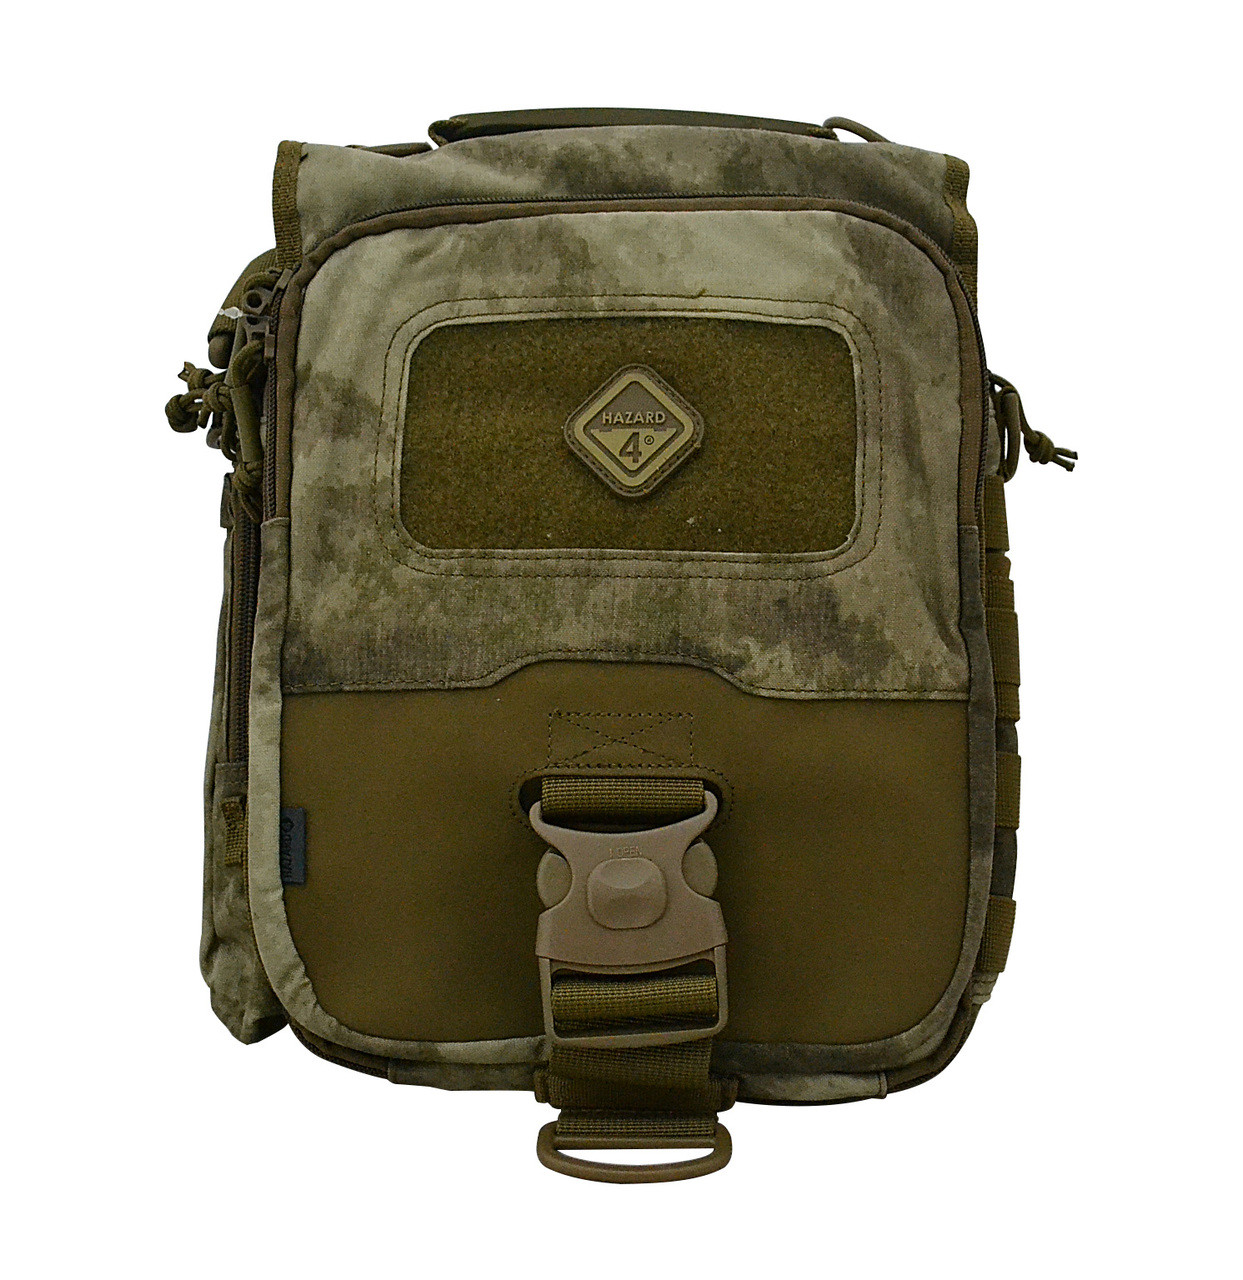 Tonto™ Concealed Carry Mini-Messenger by Hazard 4® - Outdoor, Military, and  Pro Gear - We Ship Internationally